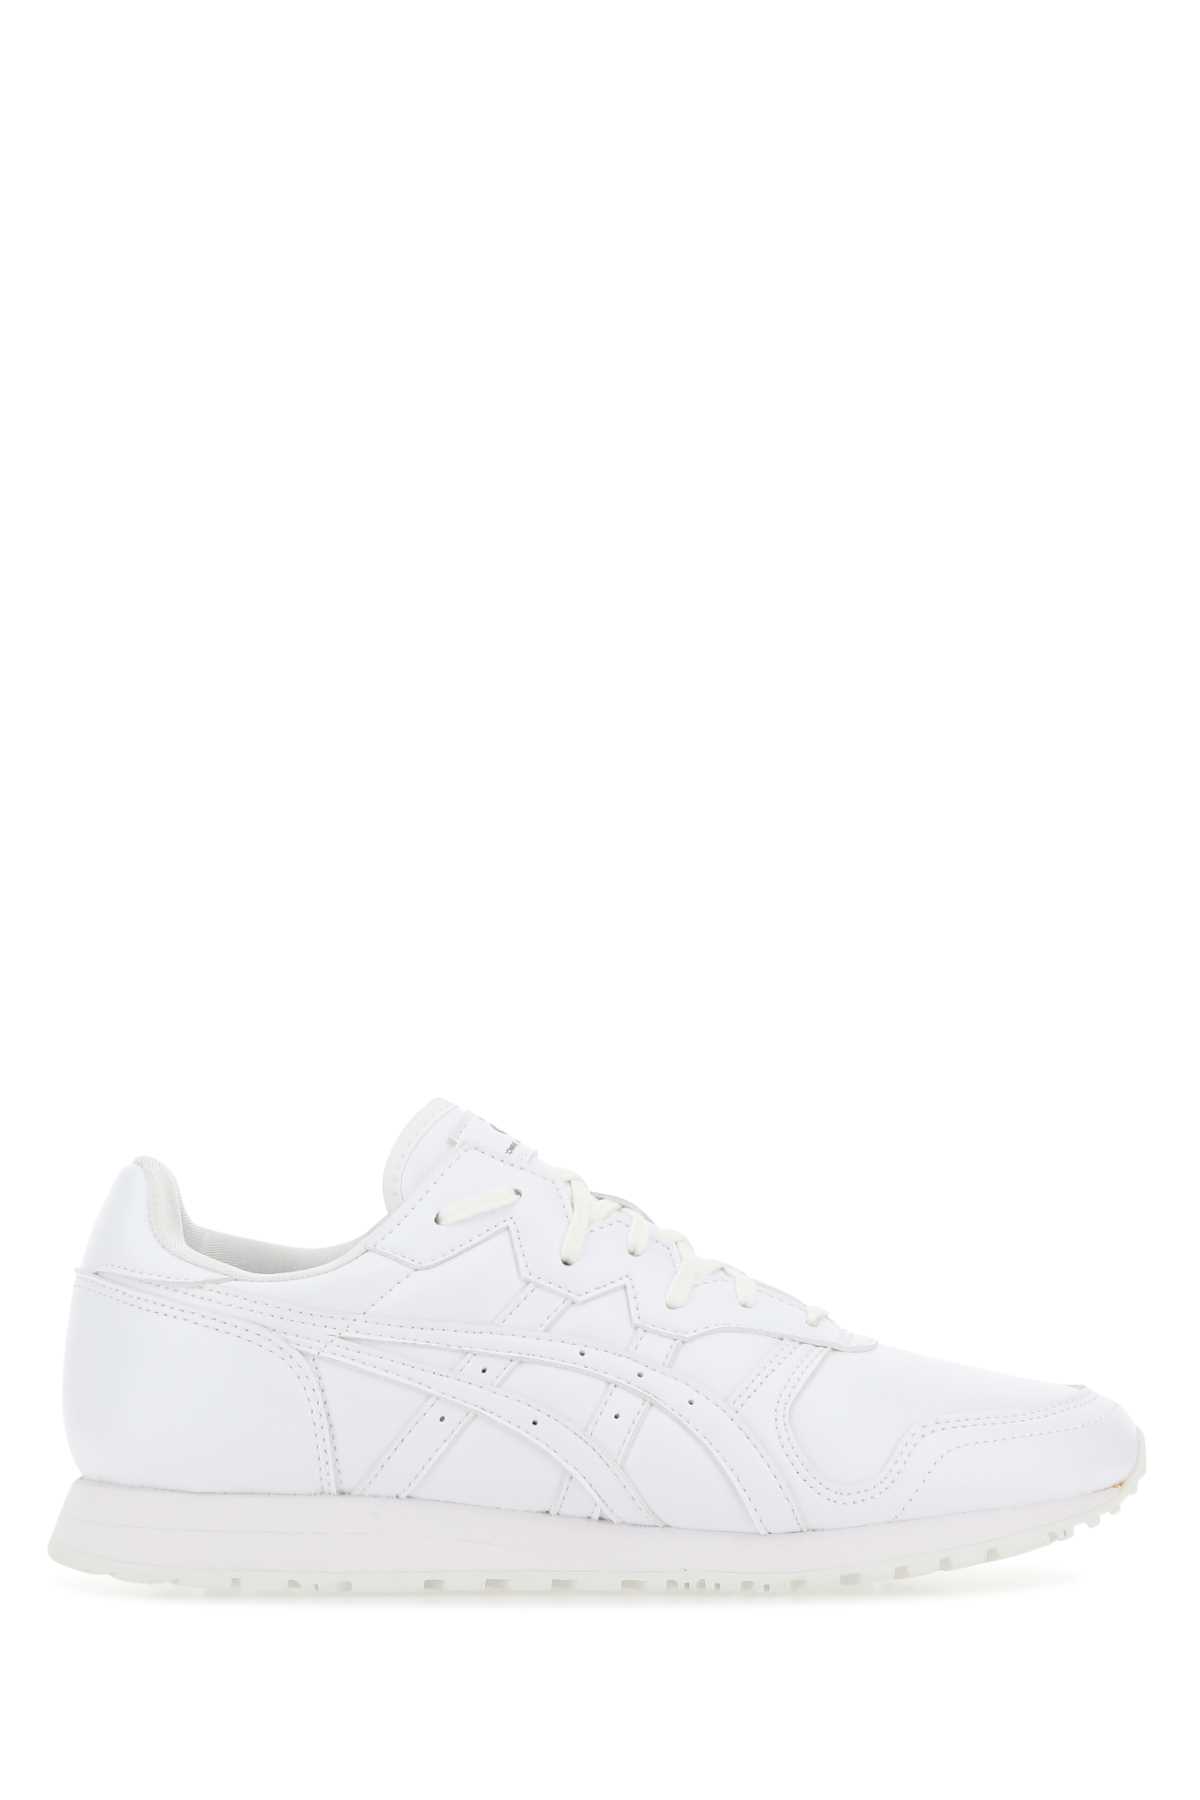 White Synthetic Leather Oc Runner Sneakers